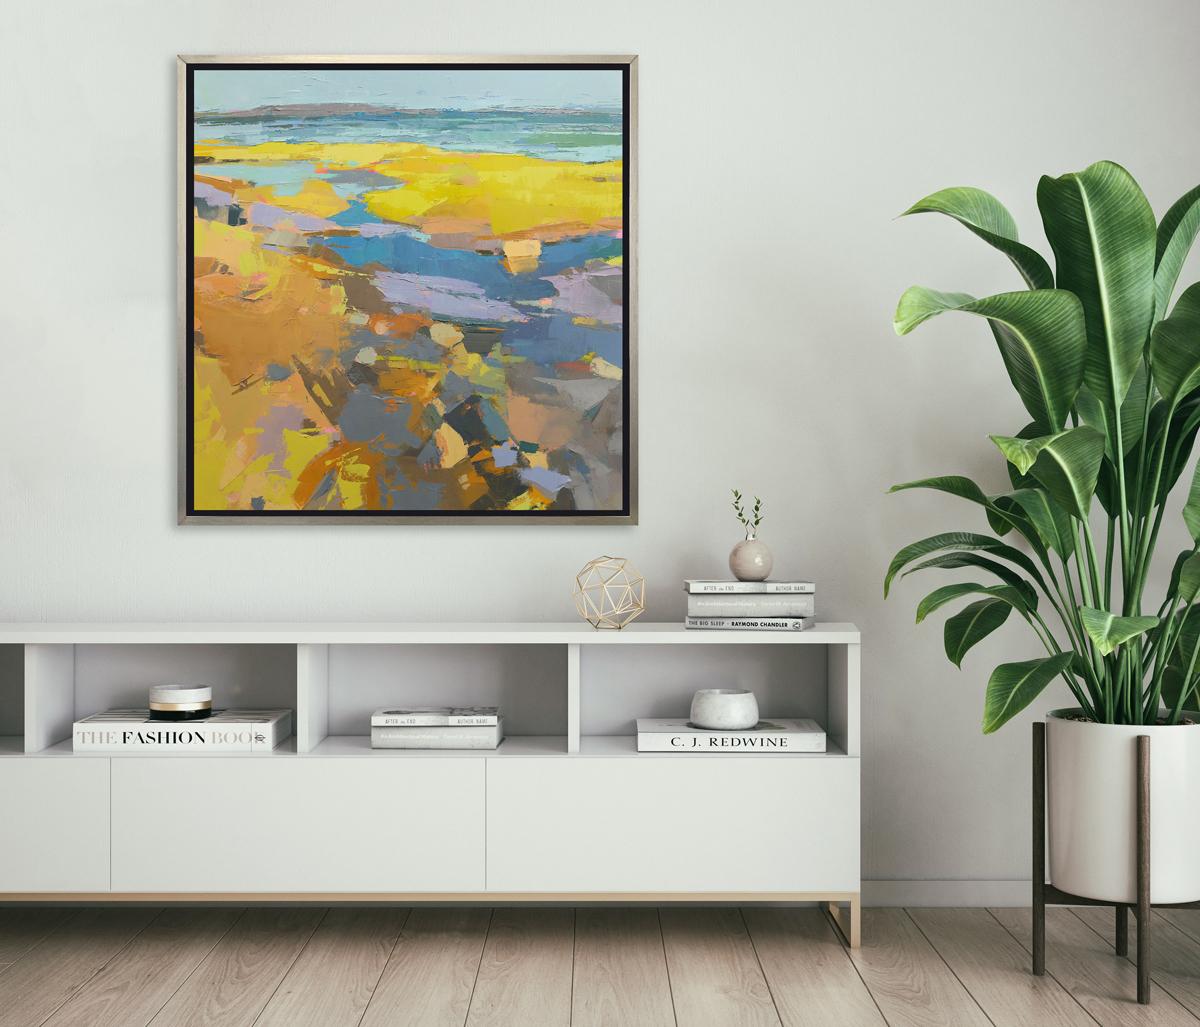 This Limited Edition giclee landscape print by Bri Custer is an edition size of 195. It features a vibrant blue and yellow palette. It captures an abstracted view of a shoreline. Printed on canvas, this giclee ships framed in a warm silver floater